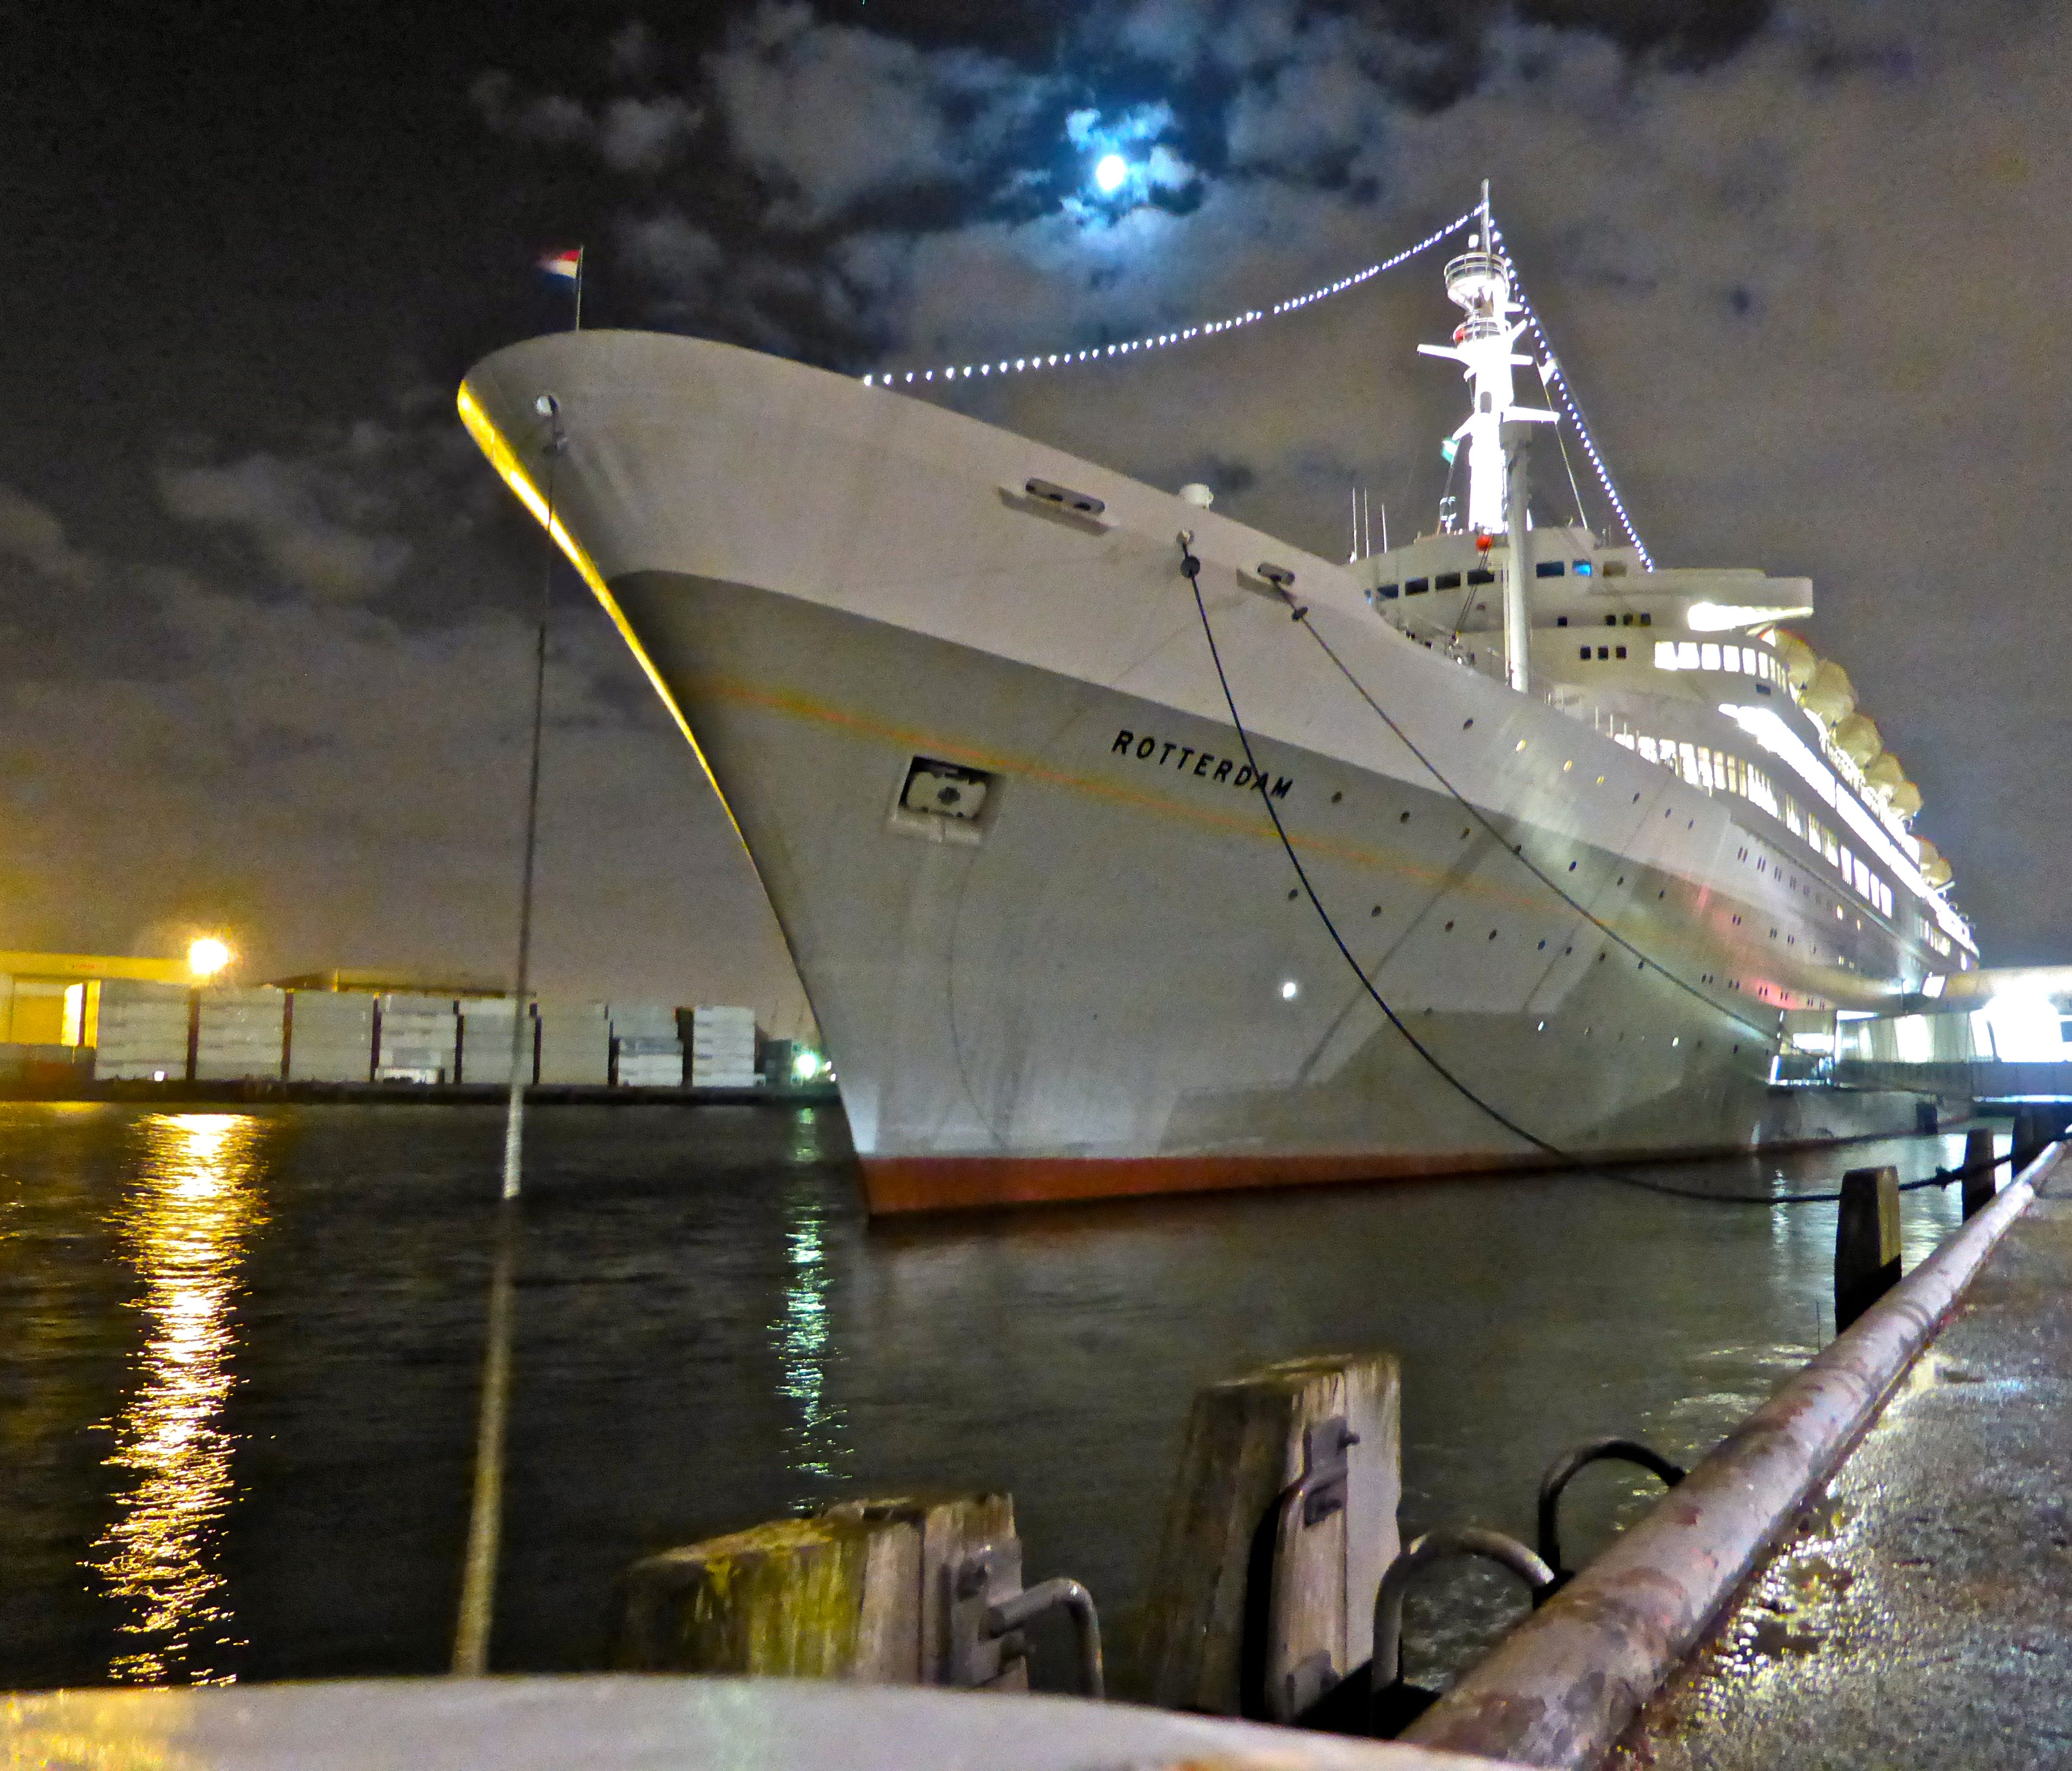 Restored to its original gray hulled livery, the Rotterdam looks as magnificent as  ever in its new function as a hotel, museum and convention center.